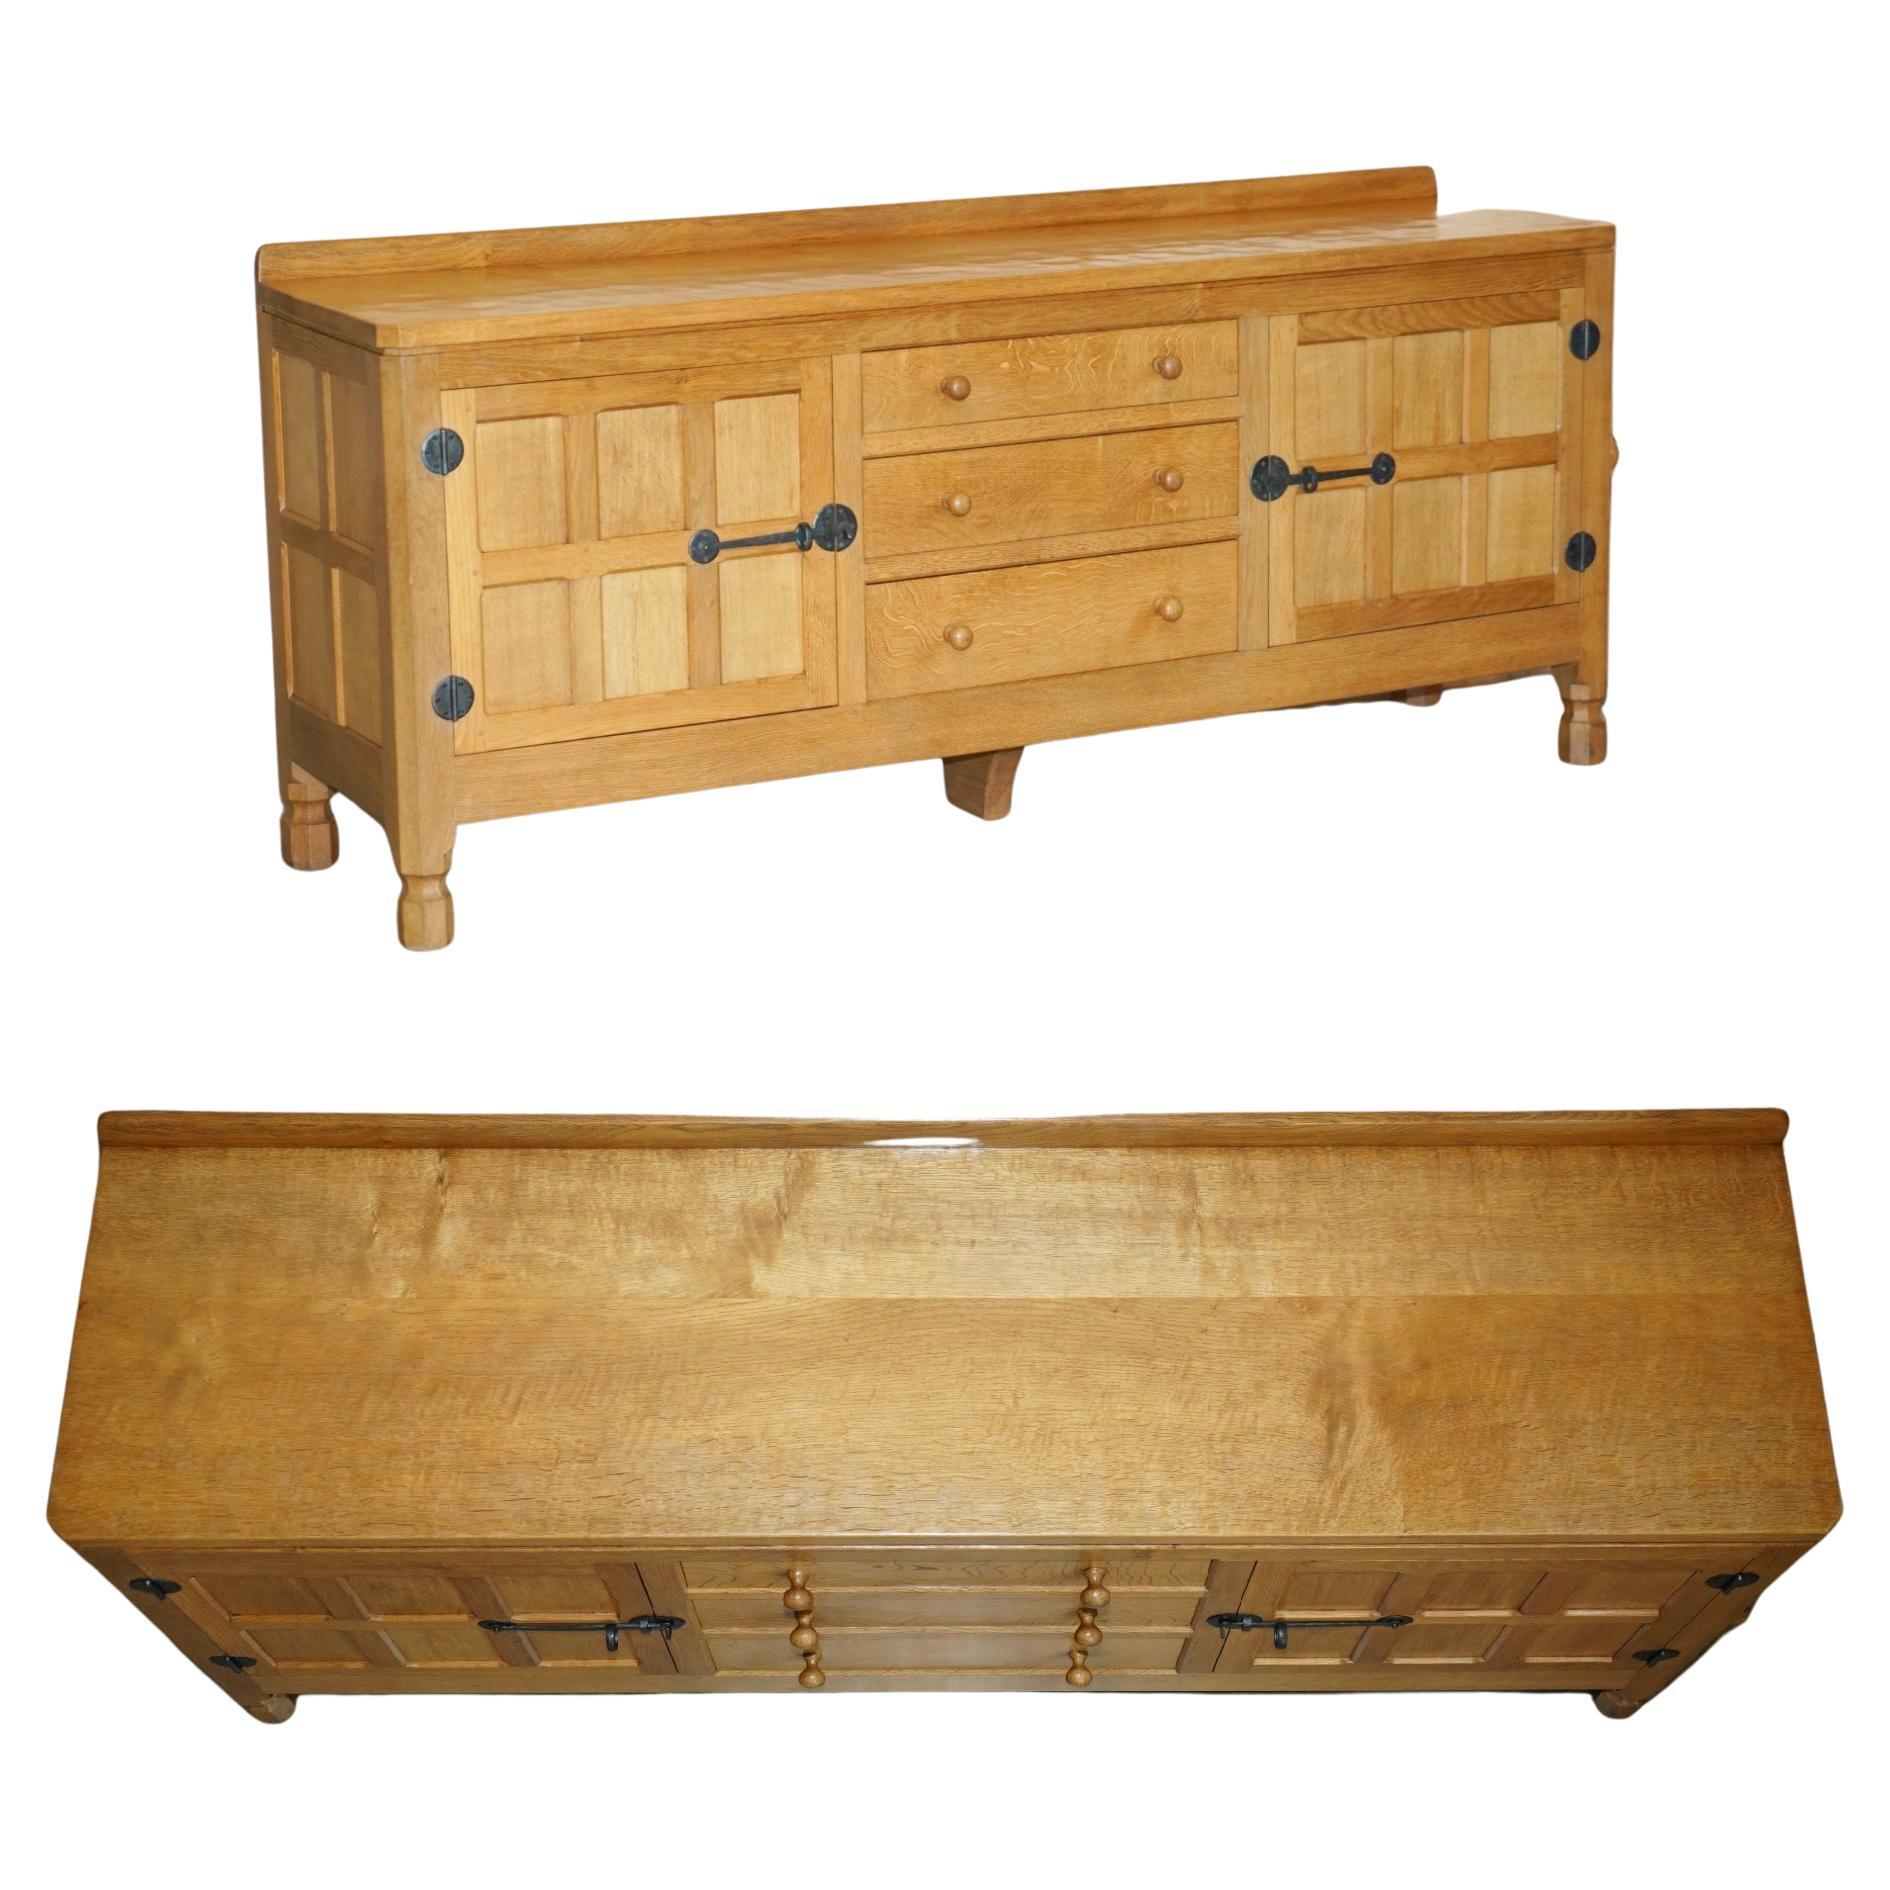 Royal House Antiques

Royal House Antiques is delighted to offer for sale this stunning Vintage Robert Mouseman Thompson hand made in England sideboard along with newspaper cutting that was part of a suite

Please note the delivery fee listed is